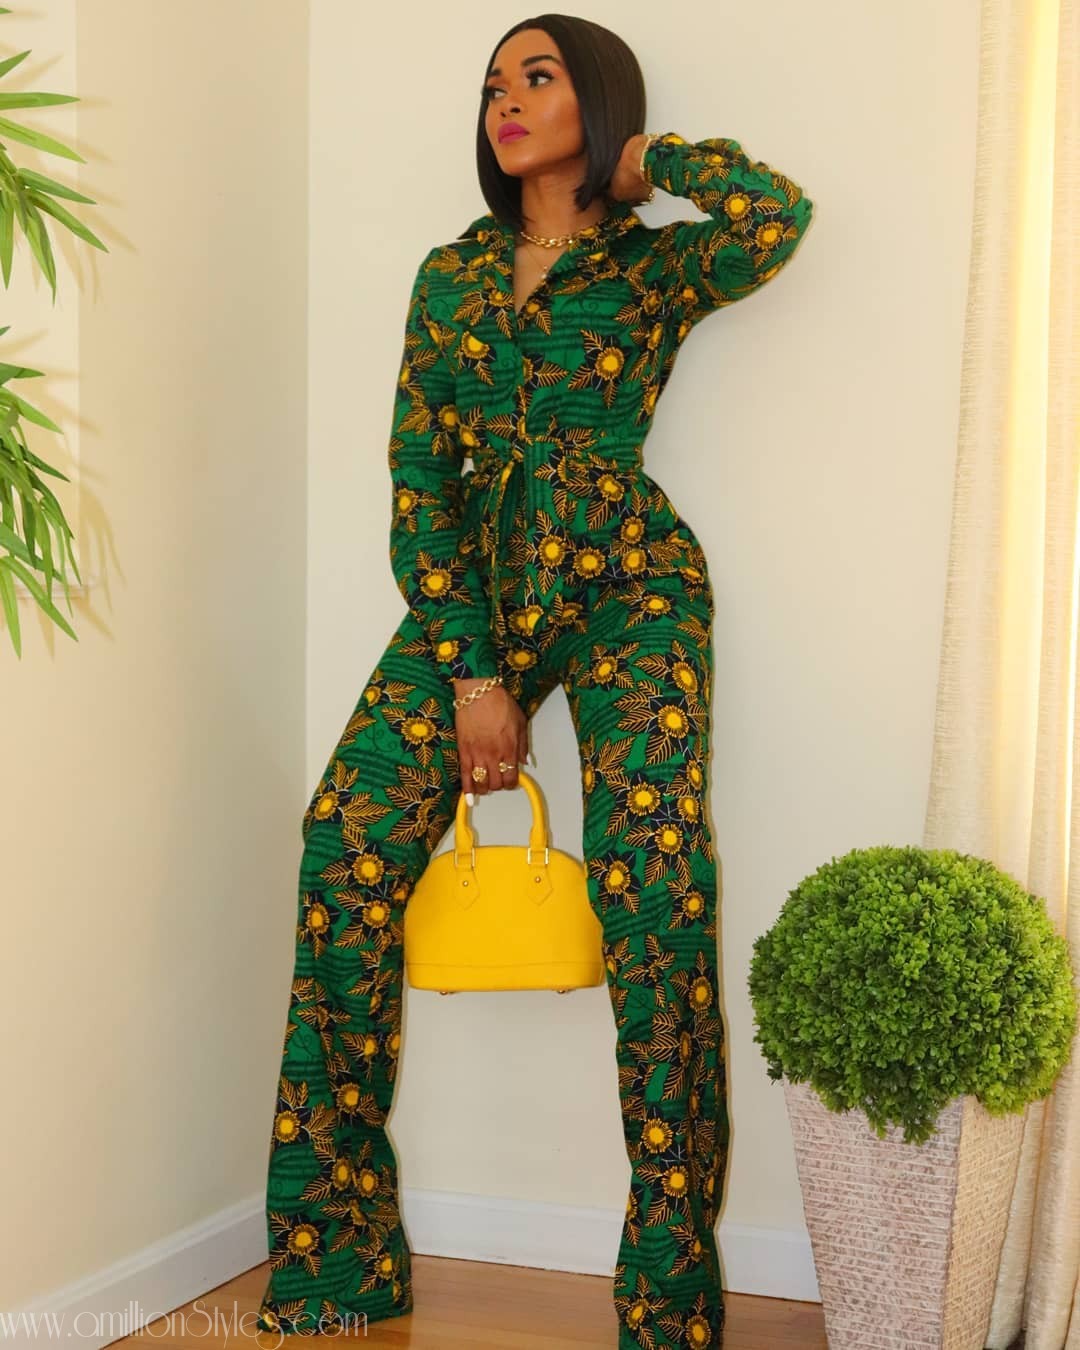 You Can't Look Away From These 12 Hawt Jumpsuit Styles